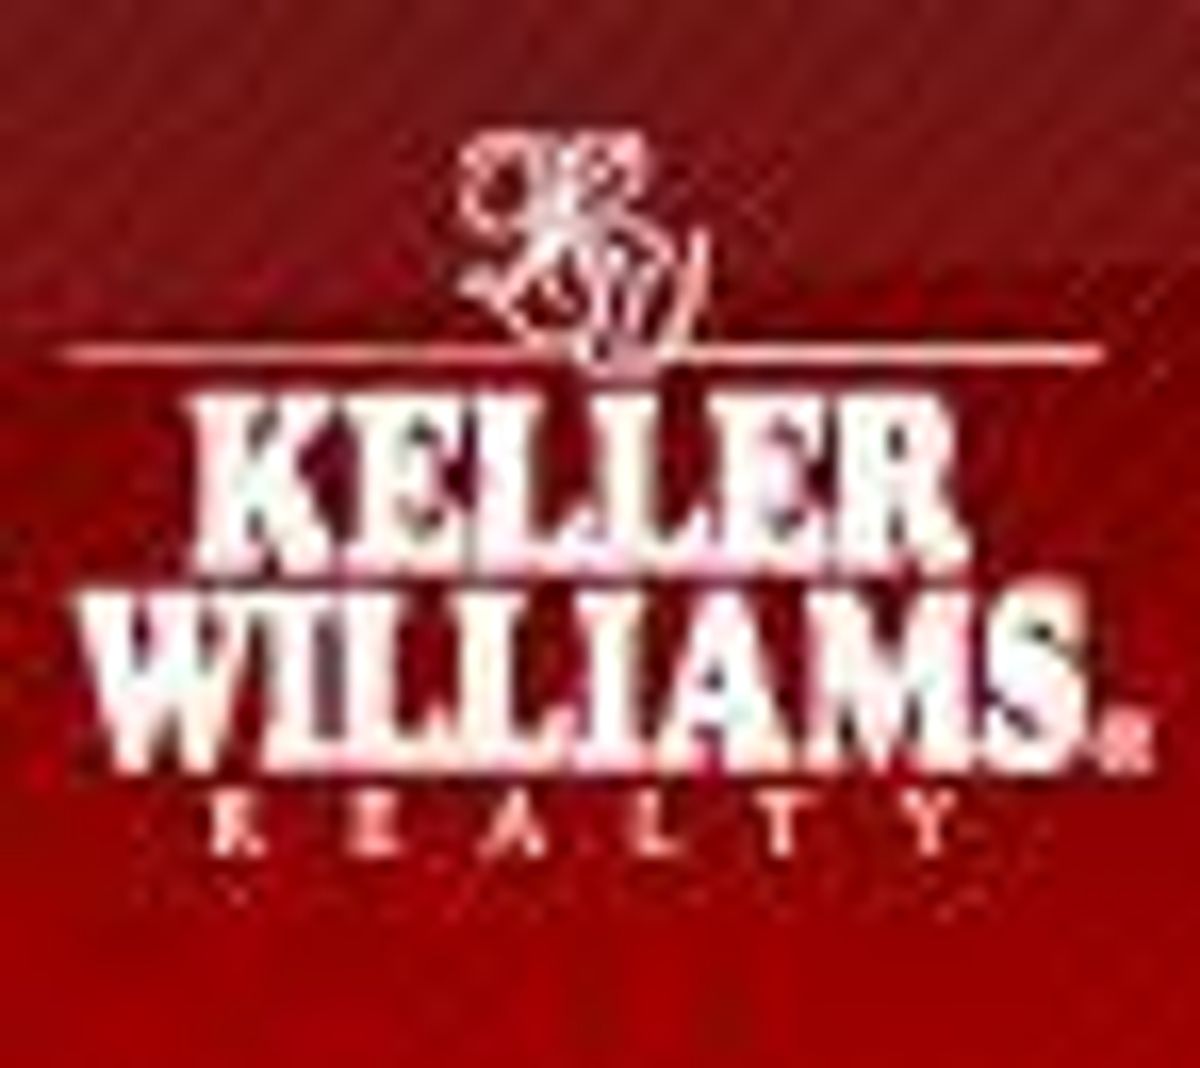 Photo for Chloe Cote, Listing Agent at KELLER WILLIAMS REALTY SMART